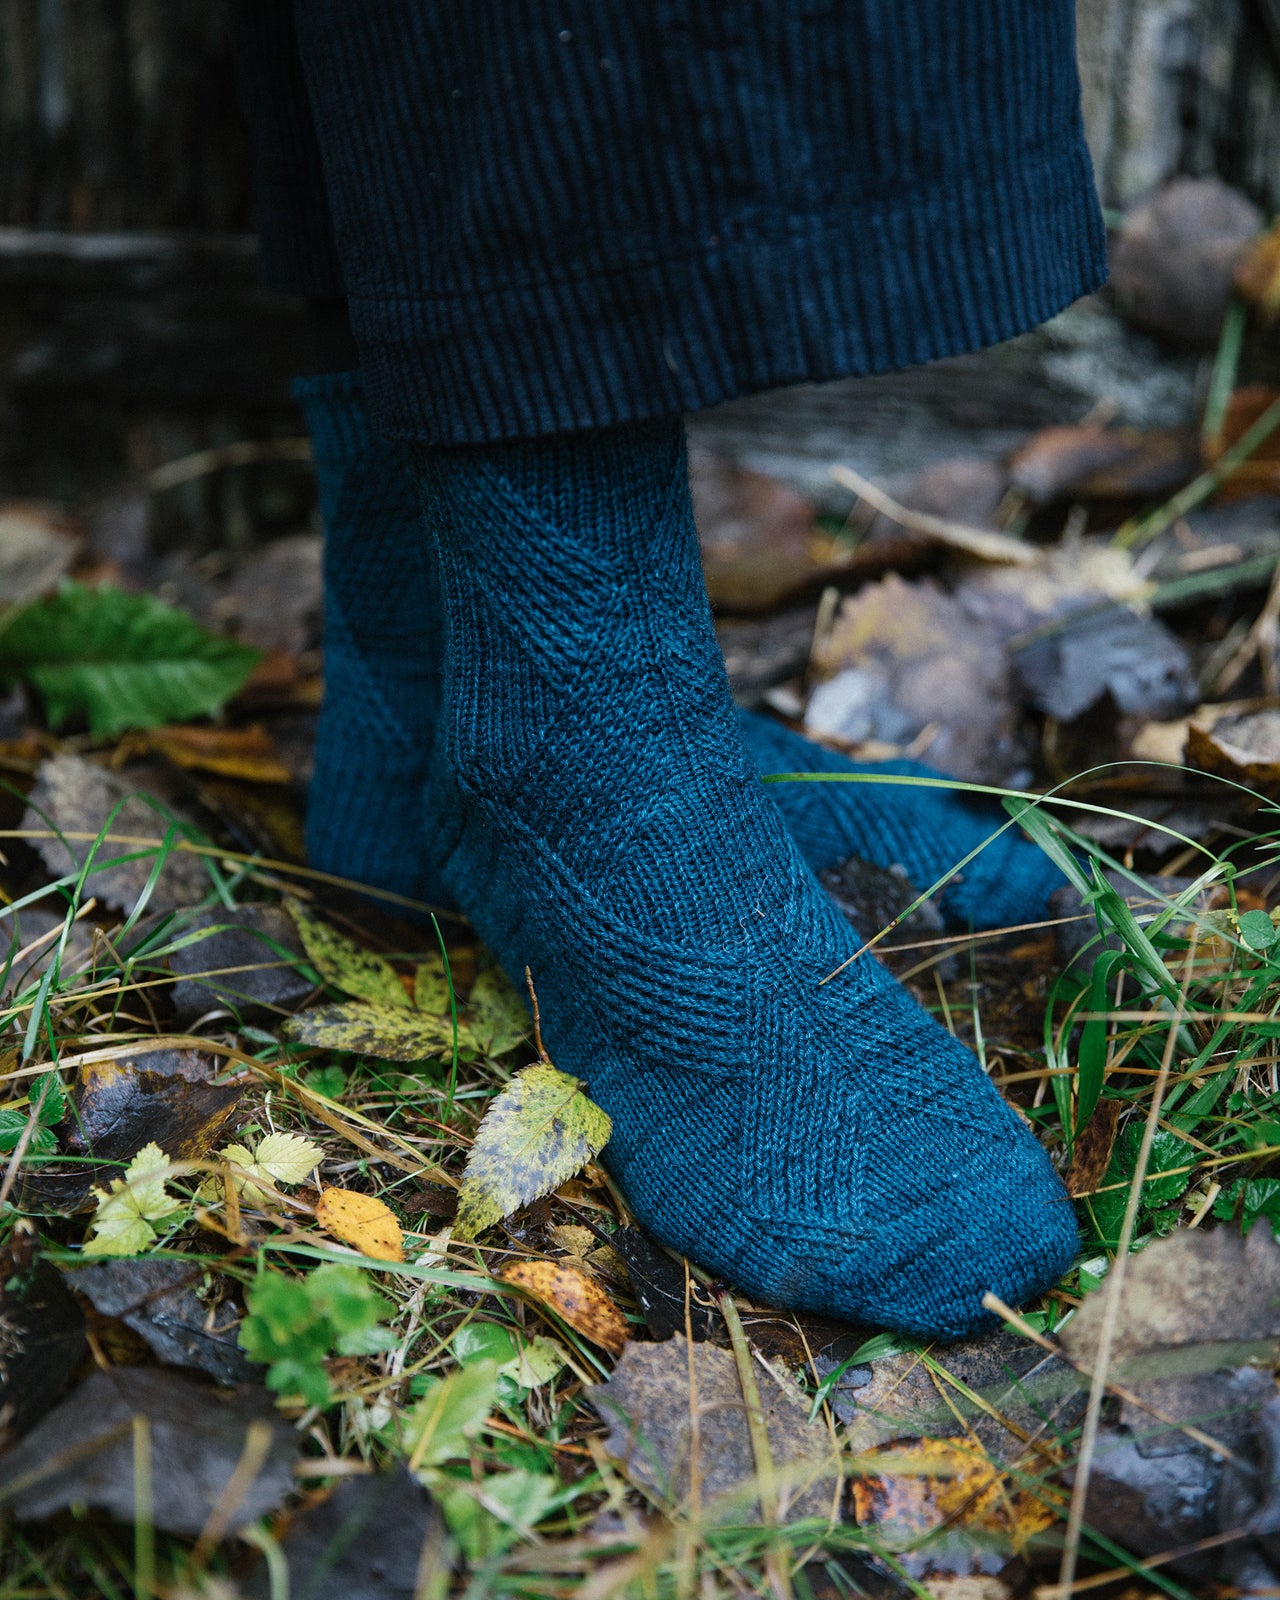 52 Weeks of Socks Vol. 2 by Laine – The Woolly Thistle